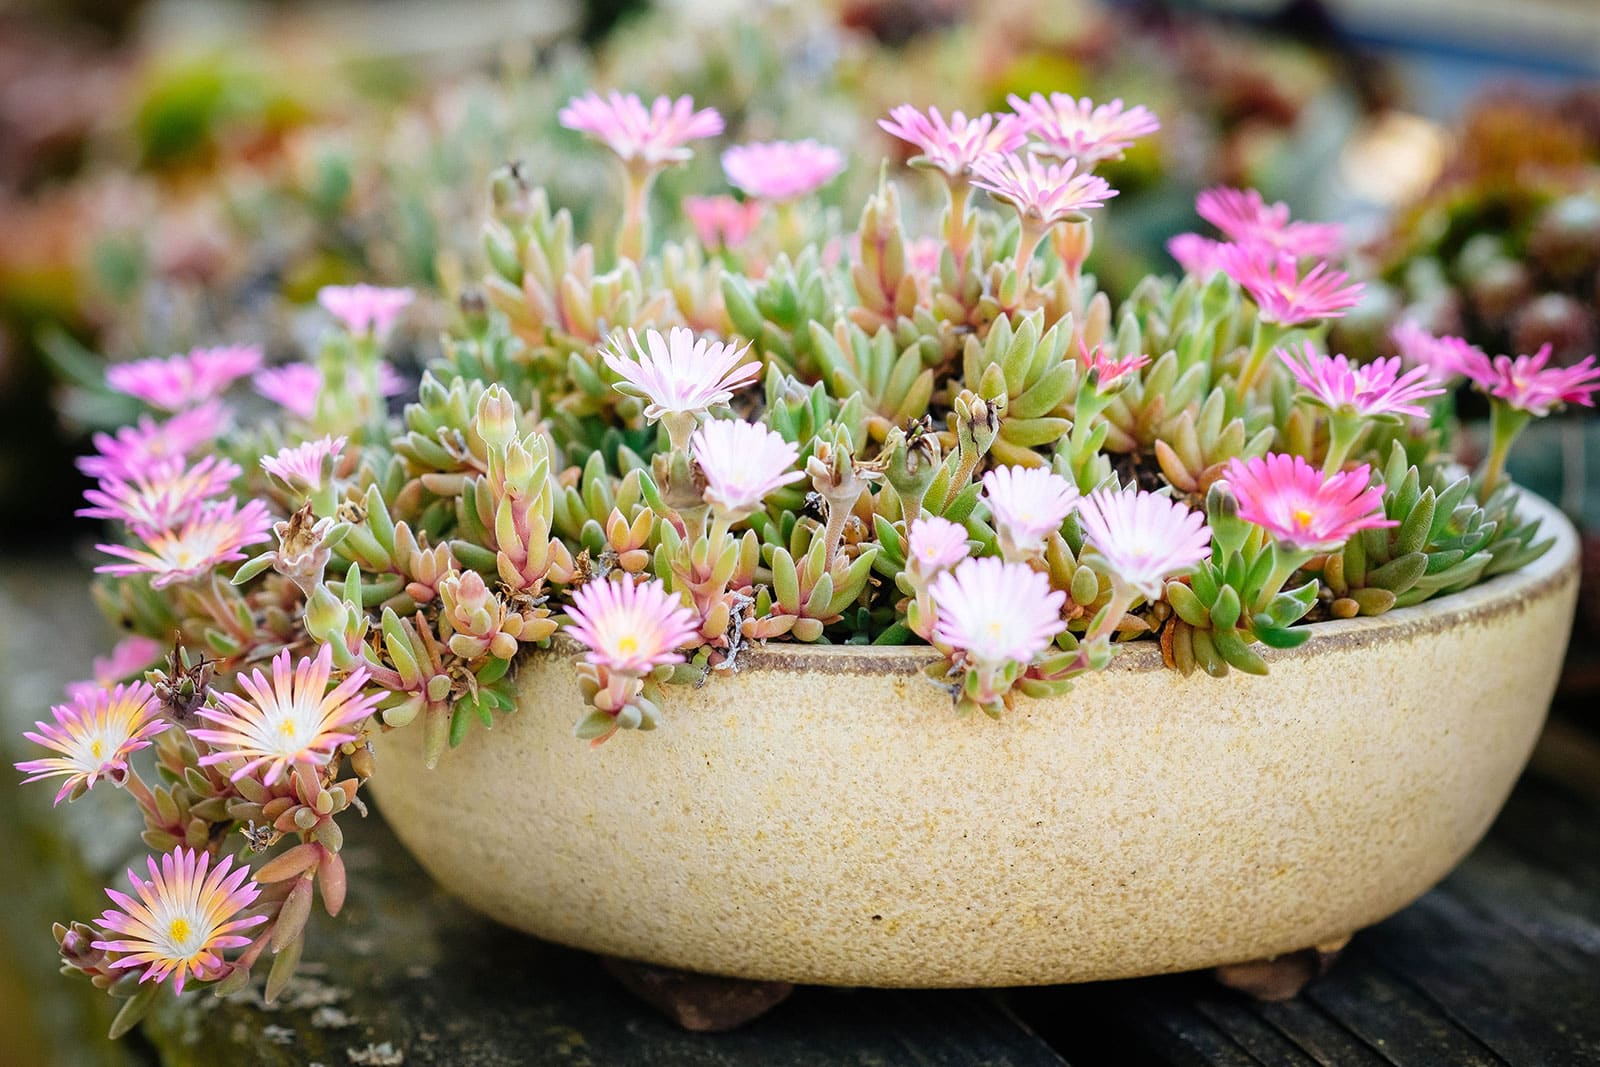 Delosperma (ice plant) blooming in a shallow pot with pink flowers